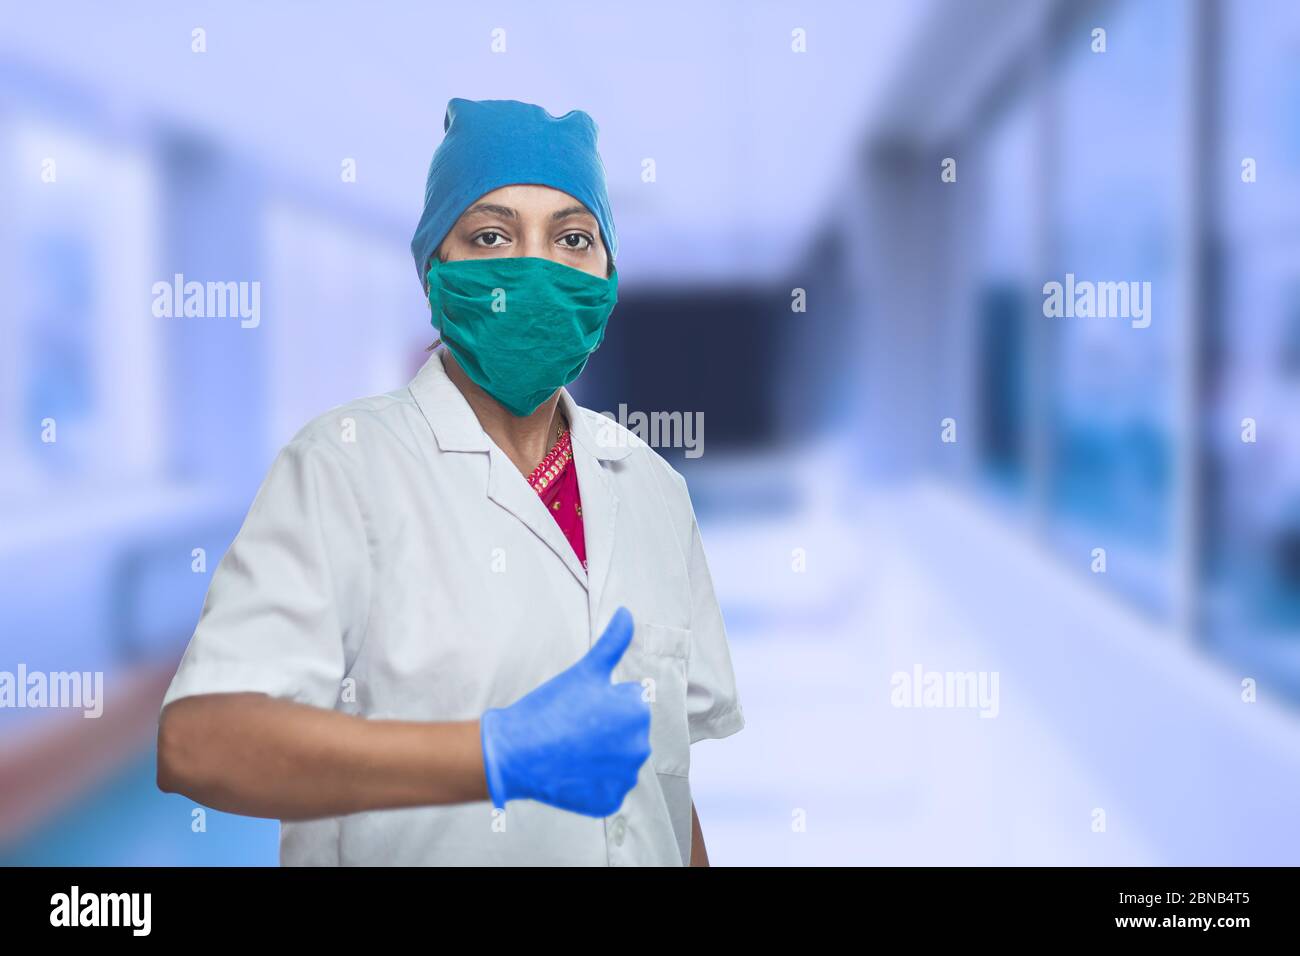 Portrait Of Female Medical Worker Doctor Wearing Surgical Mask And Cap Doing Thumbs Up, Ok Sign, Excellent Sign. Outside Hospital Corridor. Covid-19, Stock Photo